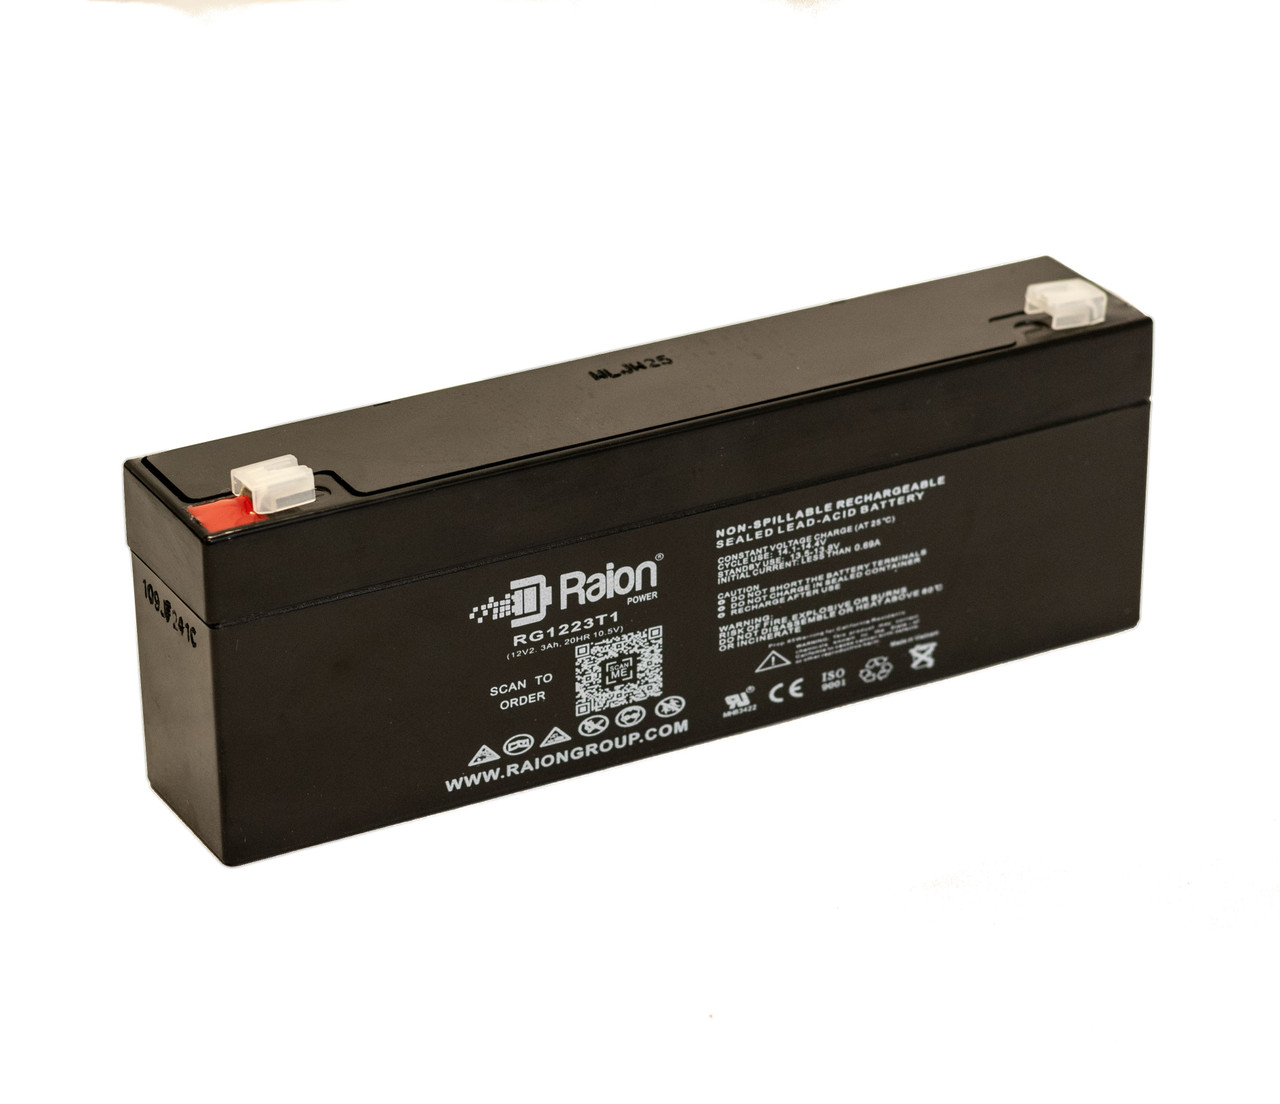 Raion Power RG1223T1 Replacement Battery for National Battery NB12-2.3